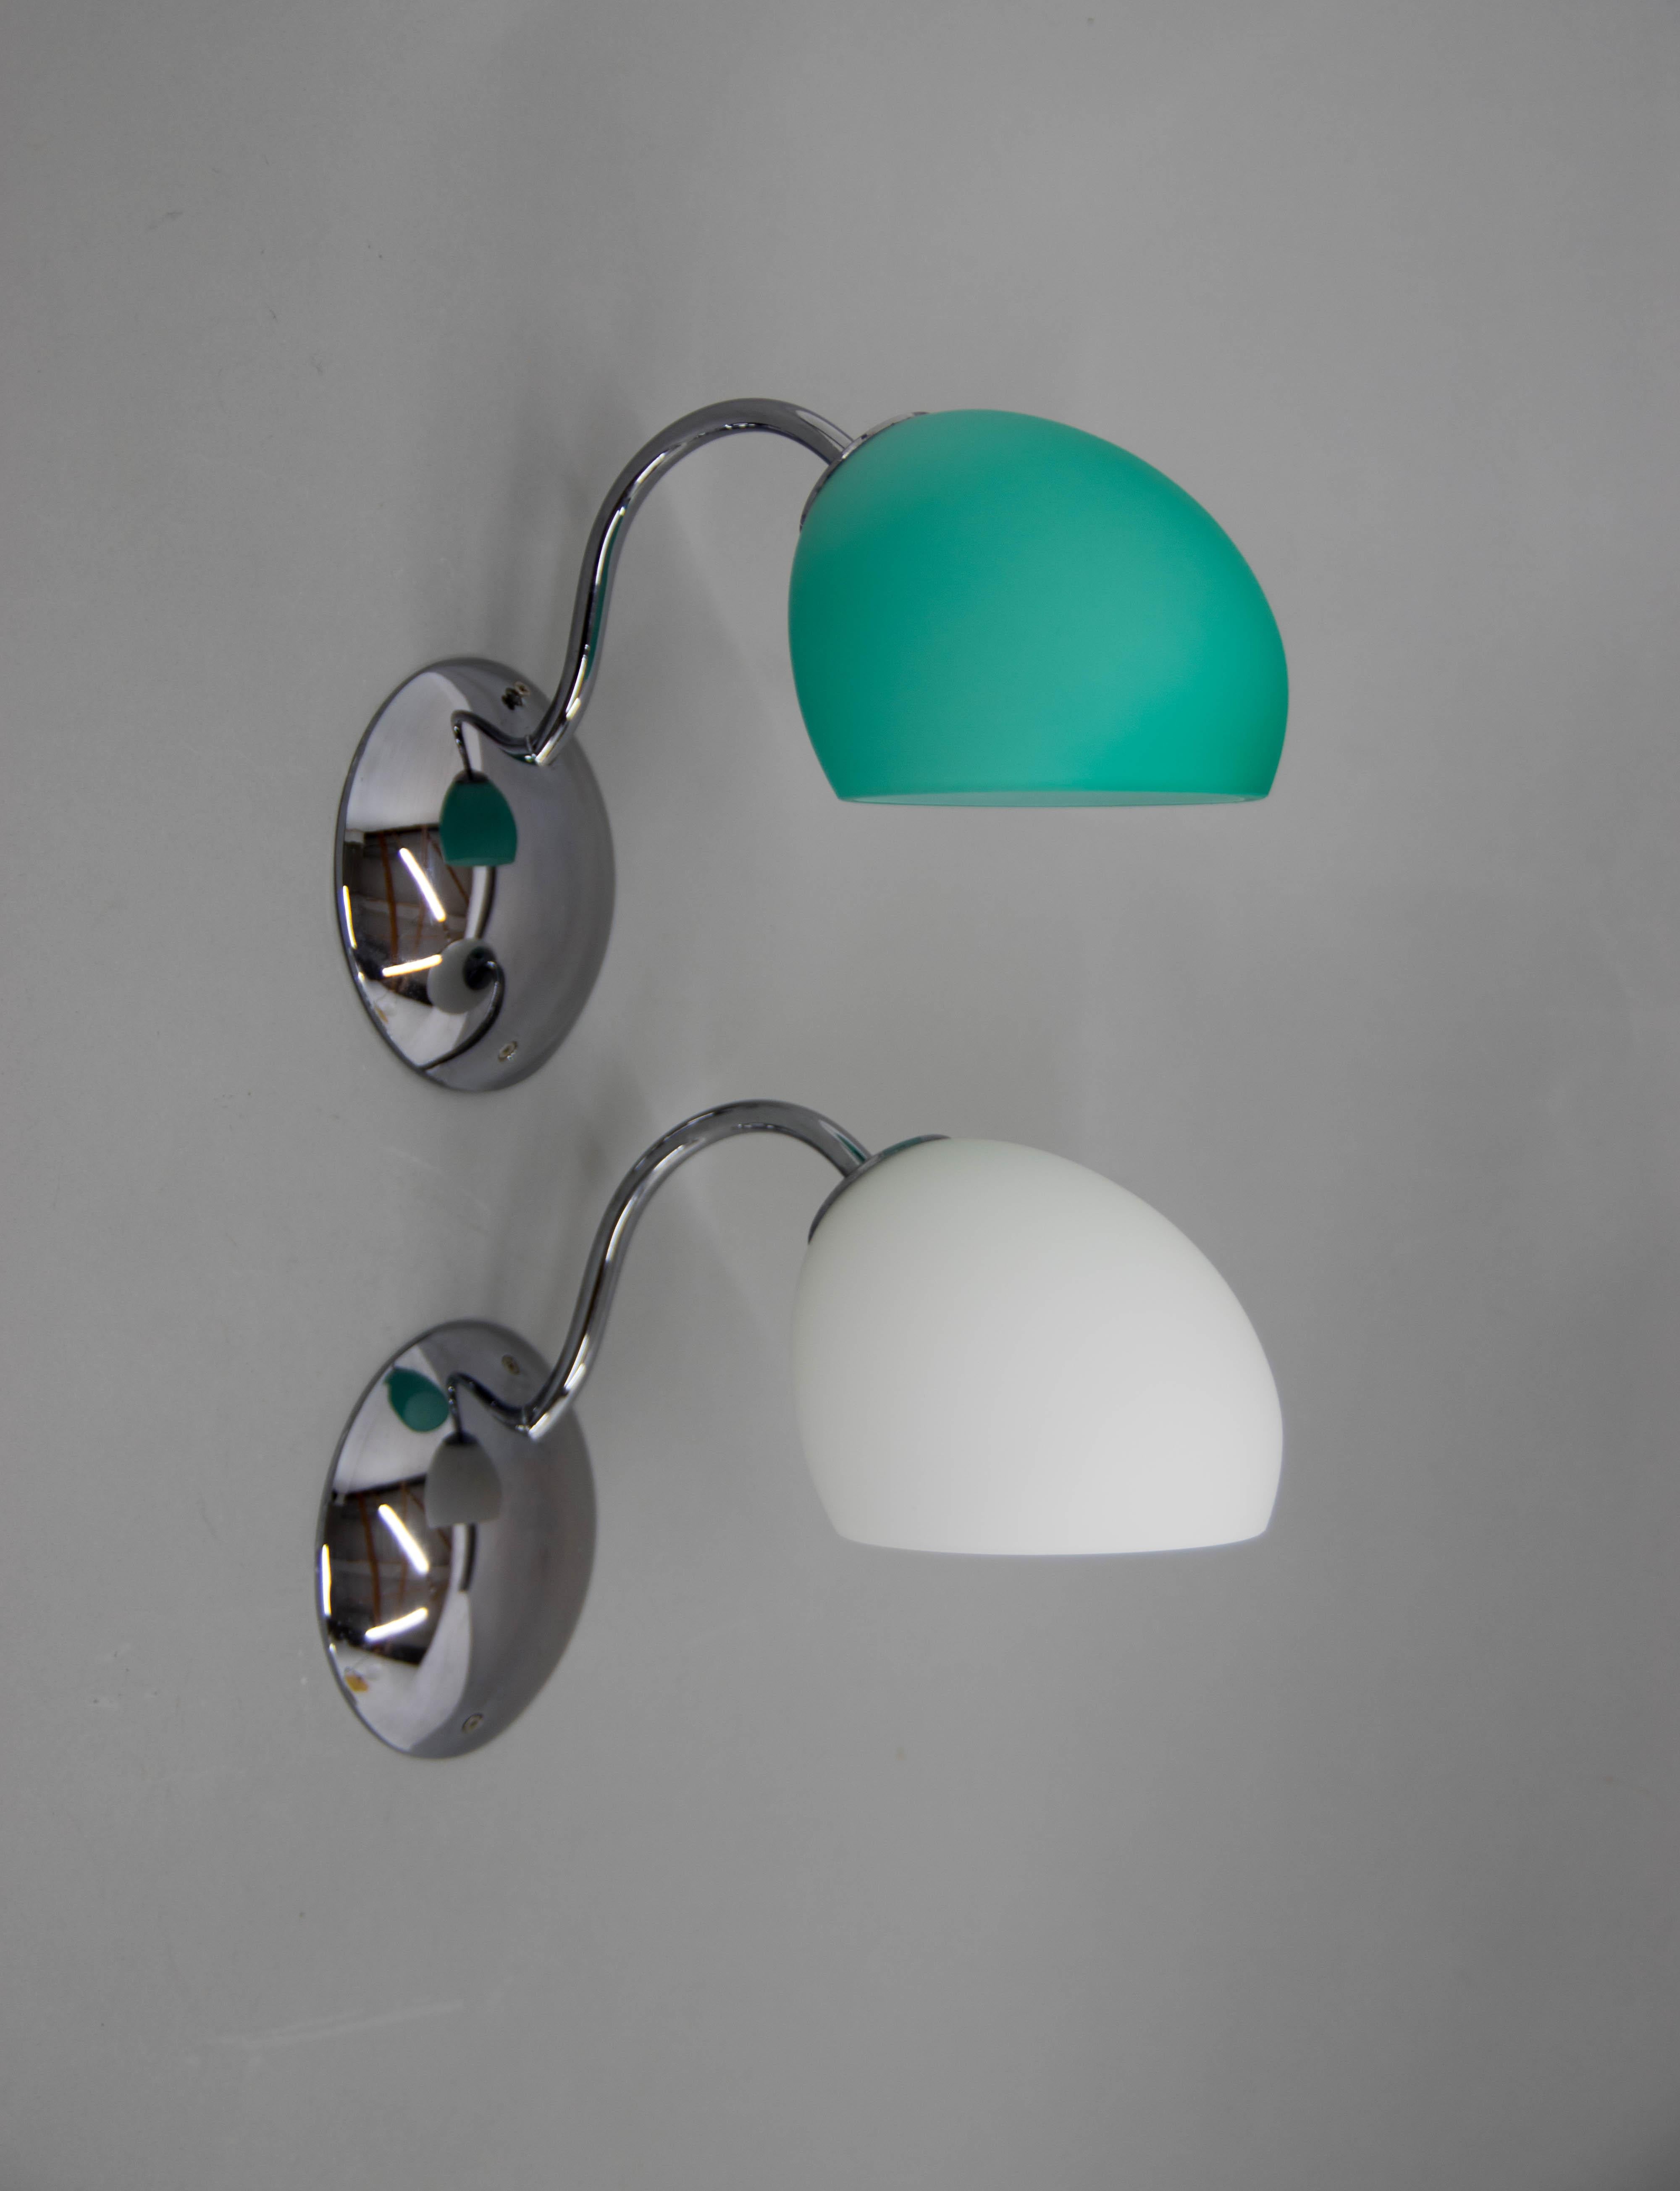 Set of two wall lights in white and azure. 
Golf P3 by Leucos lighting is a series of modern contemporary wall lights part of the Leucos Golf collection. Golf P3 are colorful wall sconce providing downward and diffused illumination from its